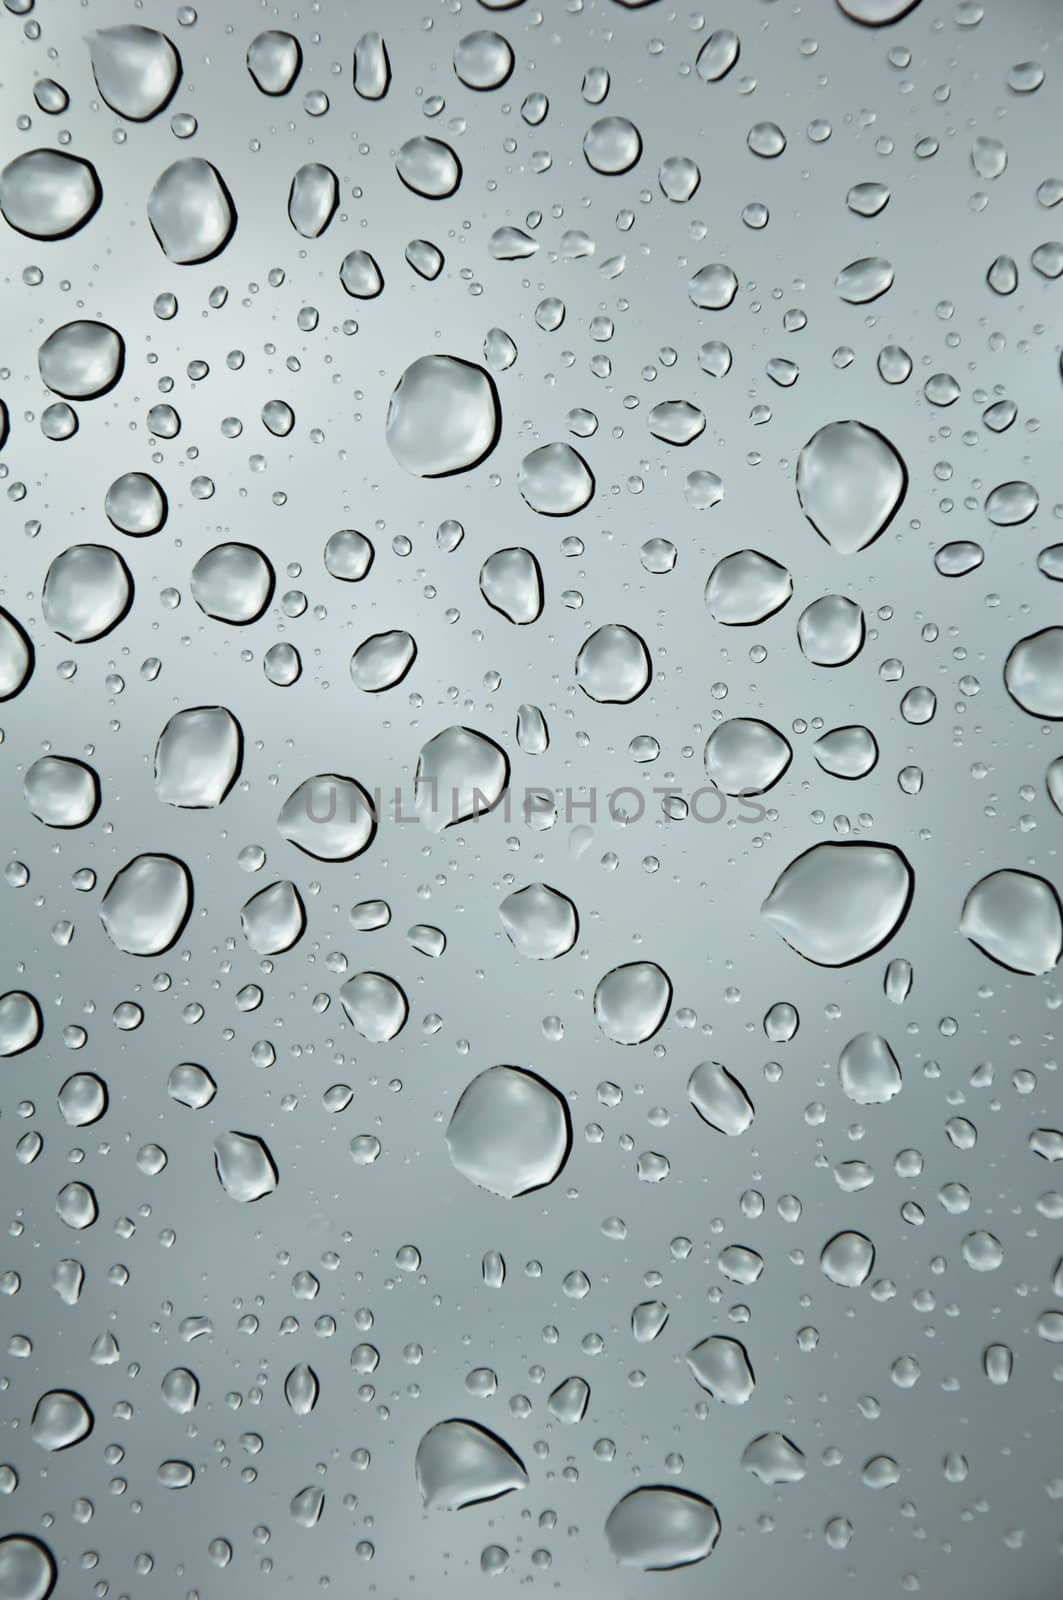 background image of rain drops on glass with a bright sky behind